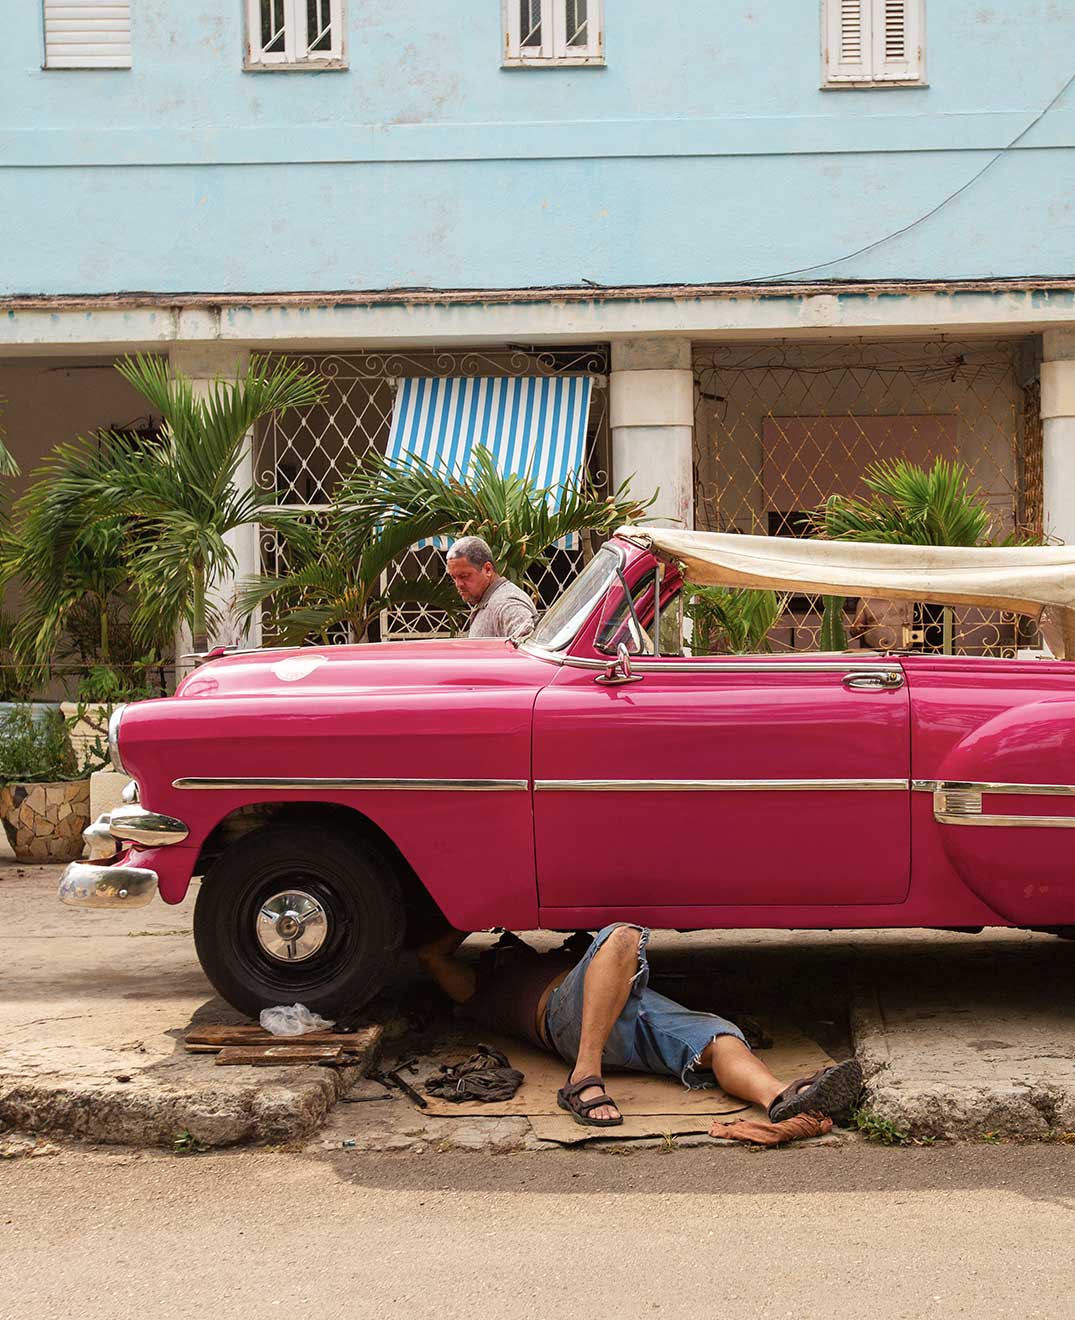 two men fixing a pink vintage car on the streets of cuba